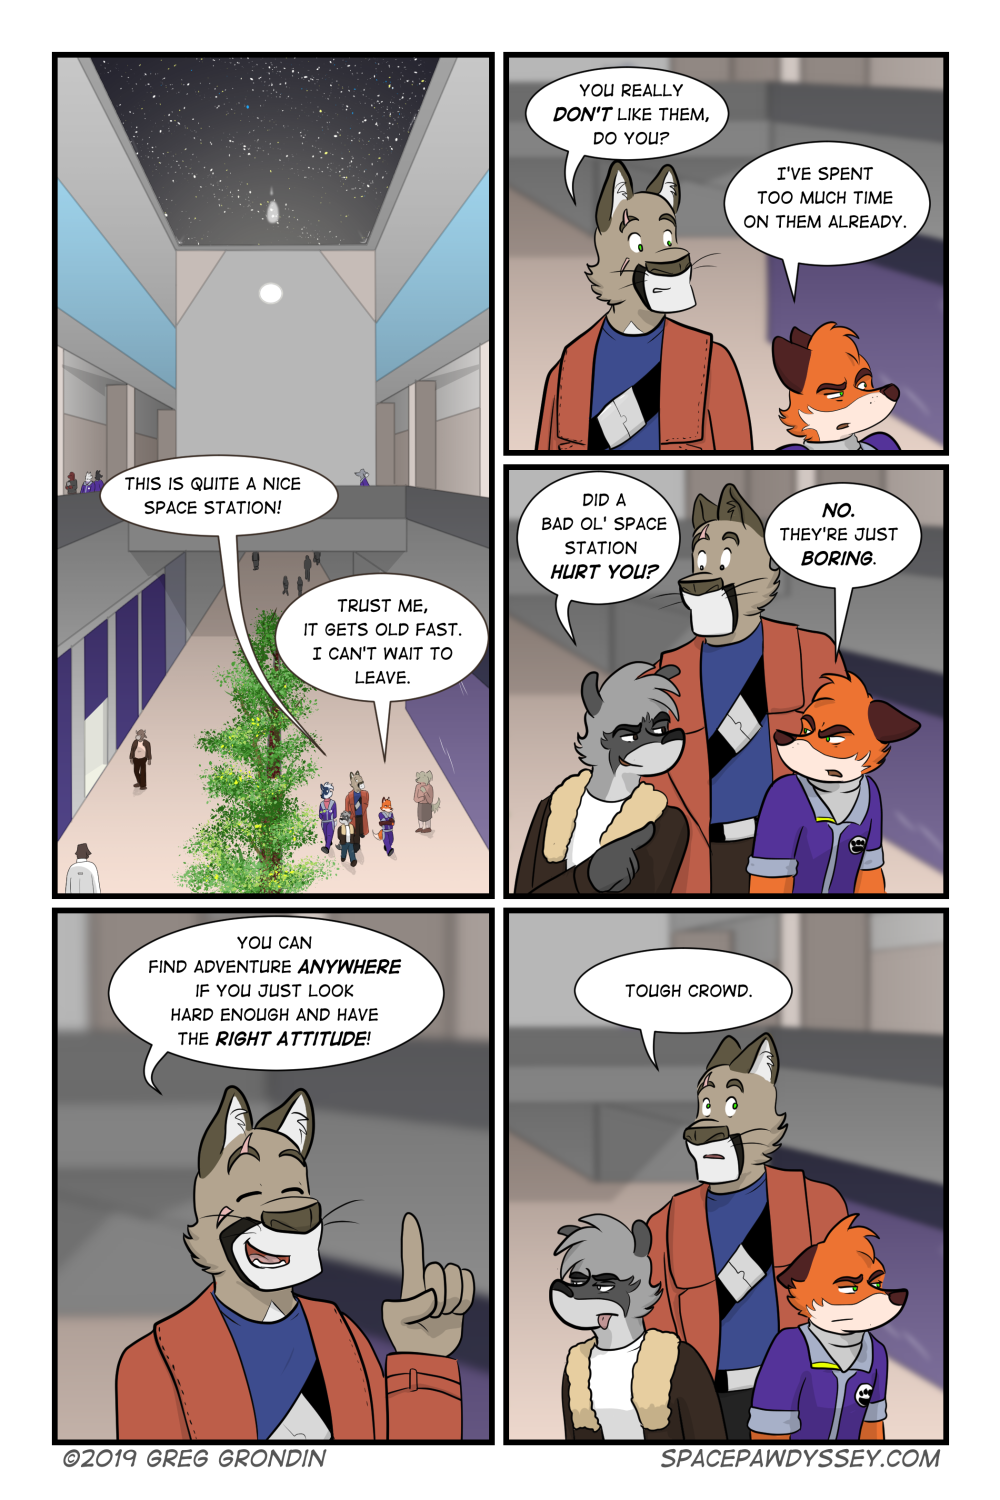 Space Pawdyssey #238